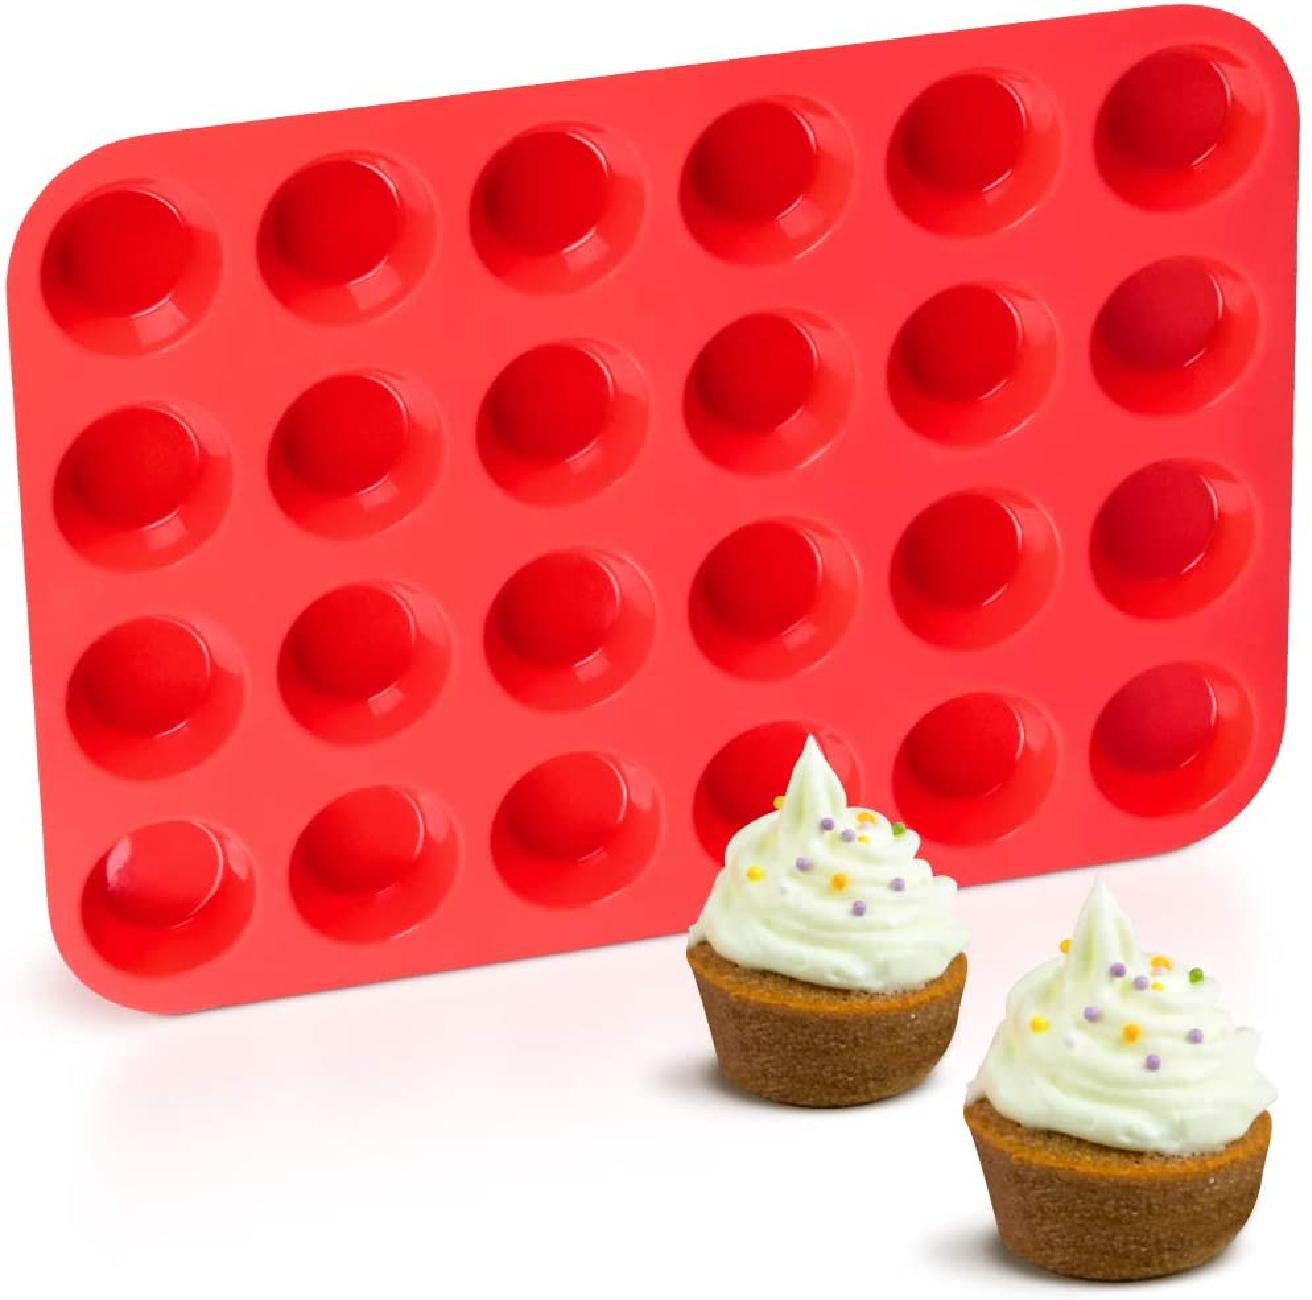 Silicone Muffin and Cupcake Pans Set Cake Molds Easy to Clean Non-Stick Bakeware